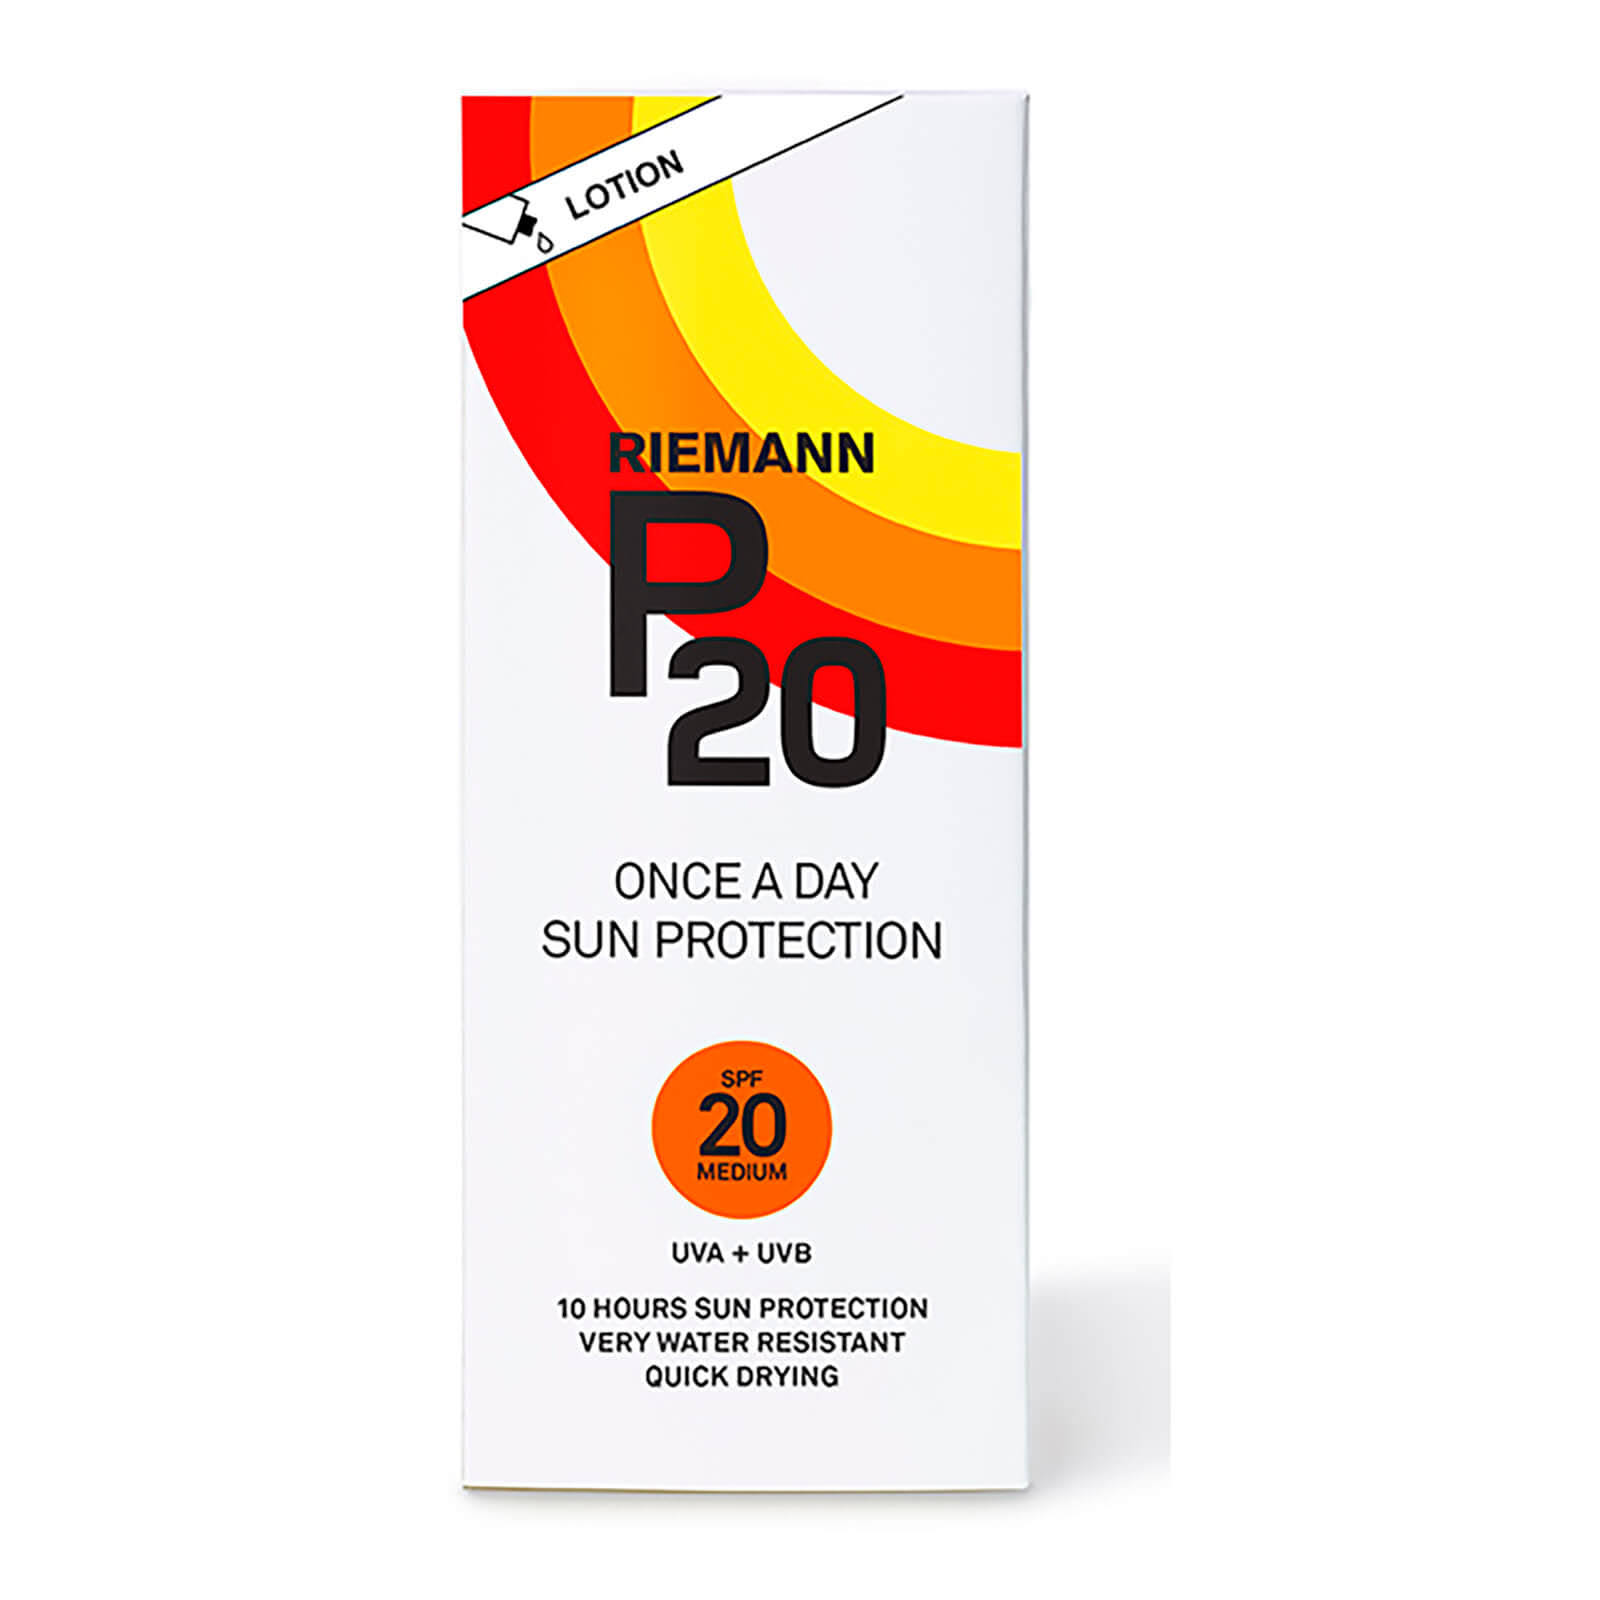 Riemann P20 Once A Day Sun Protection Lotion - 200ml, Spf 20